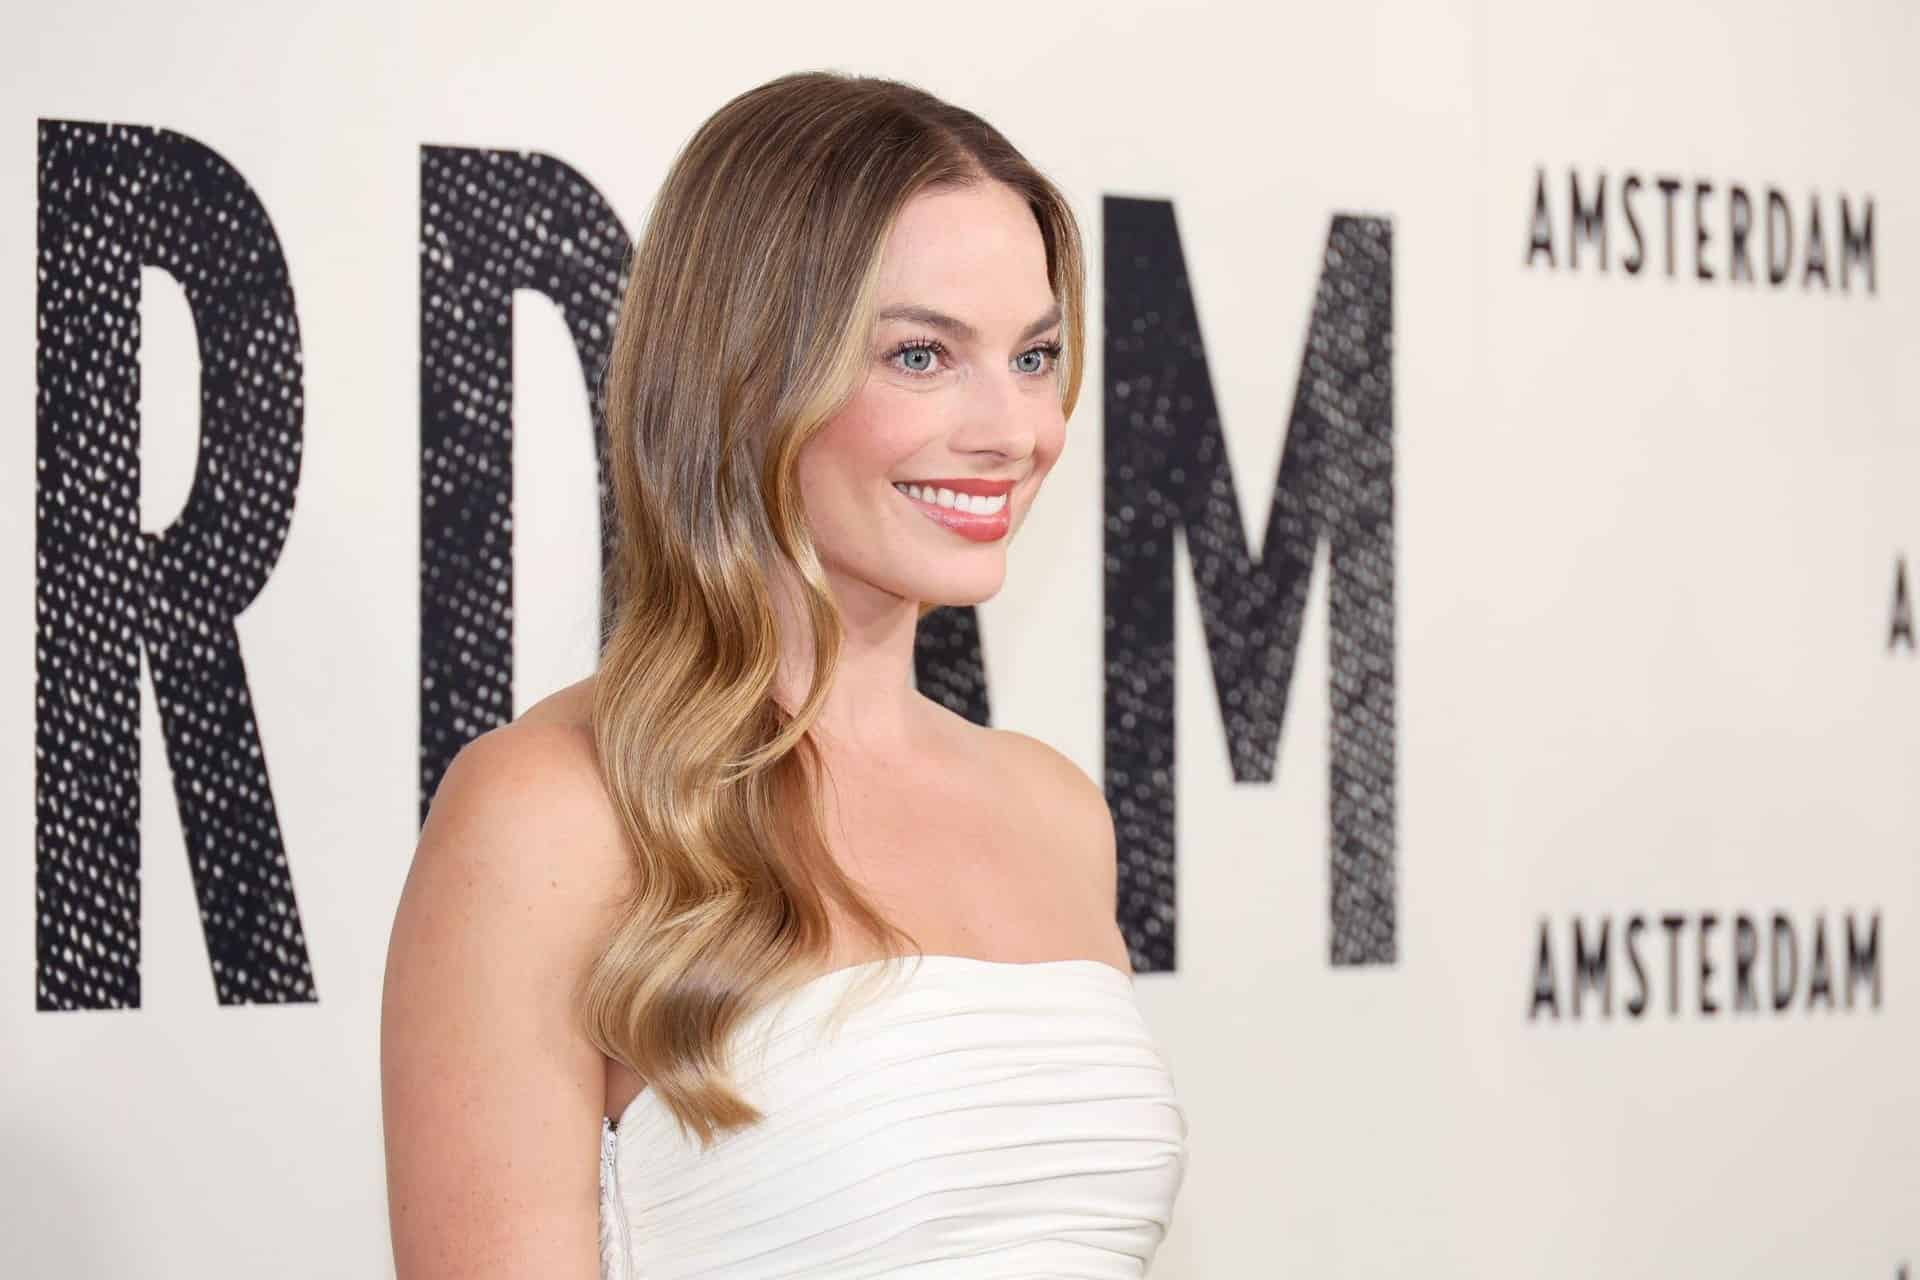 Margot Robbie Wore a Sheer Chanel Dress at the Amsterdam Premiere in NYC